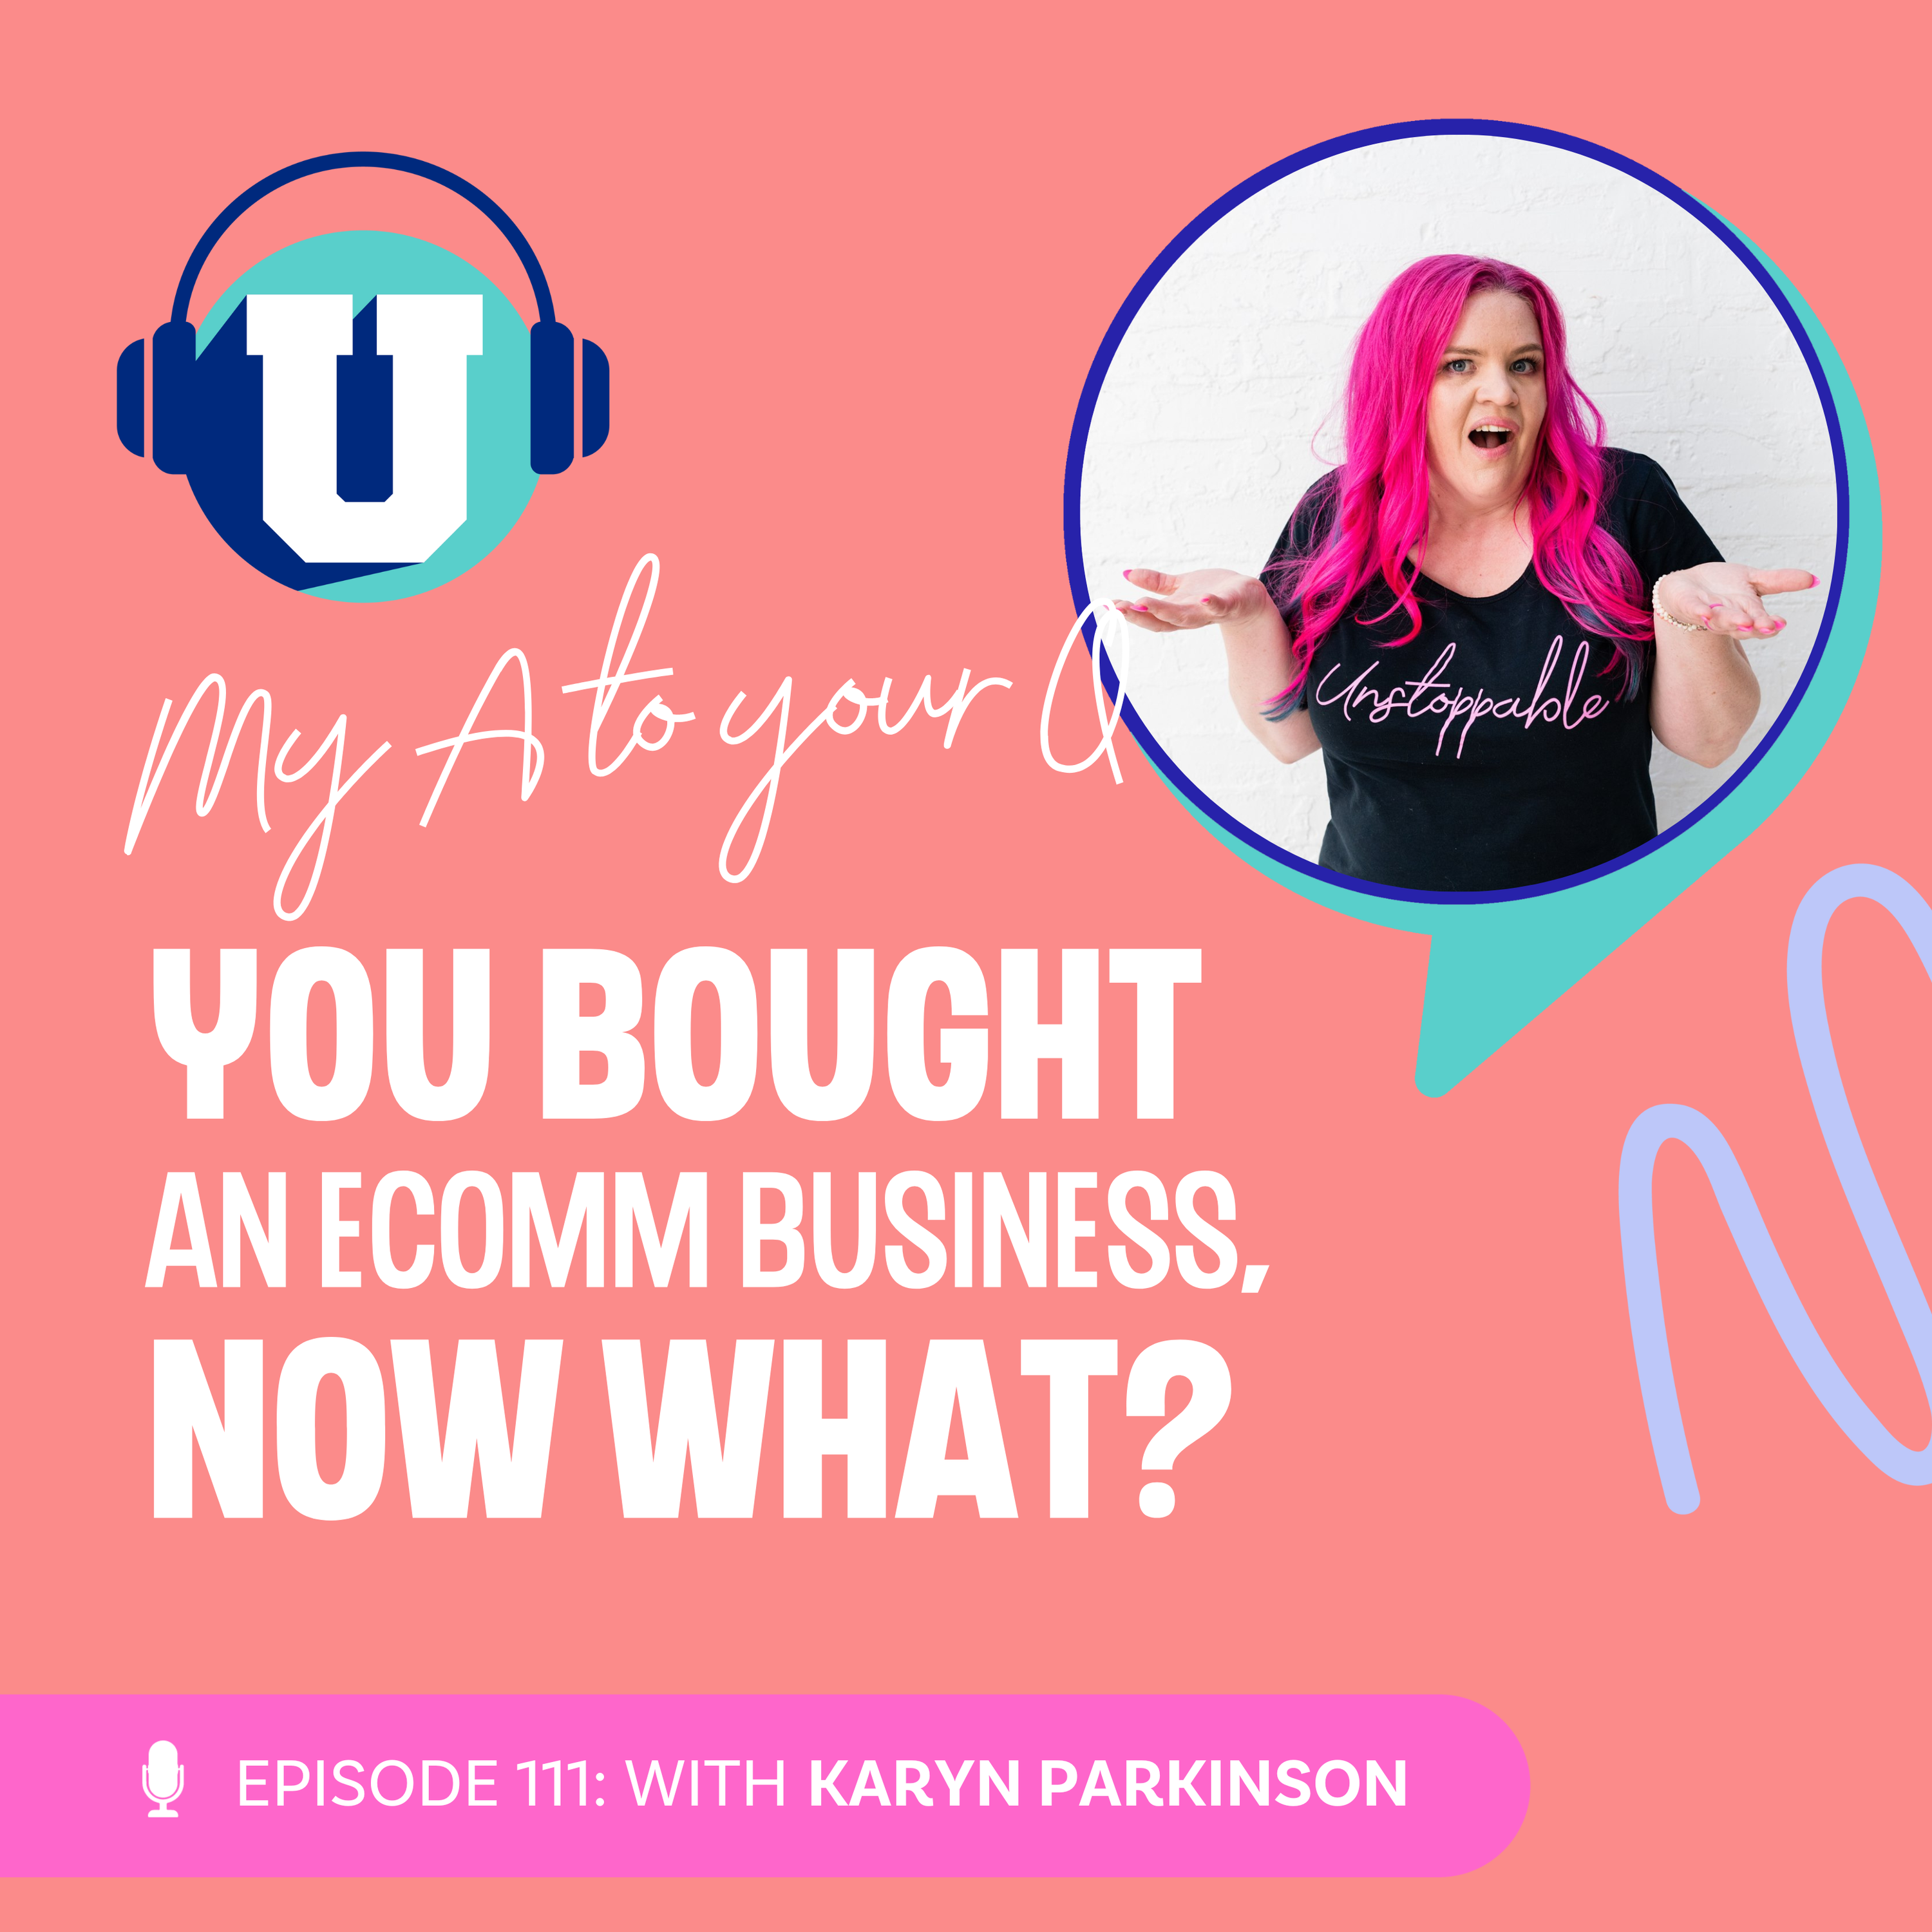 You bought an eCommerce business, now what?